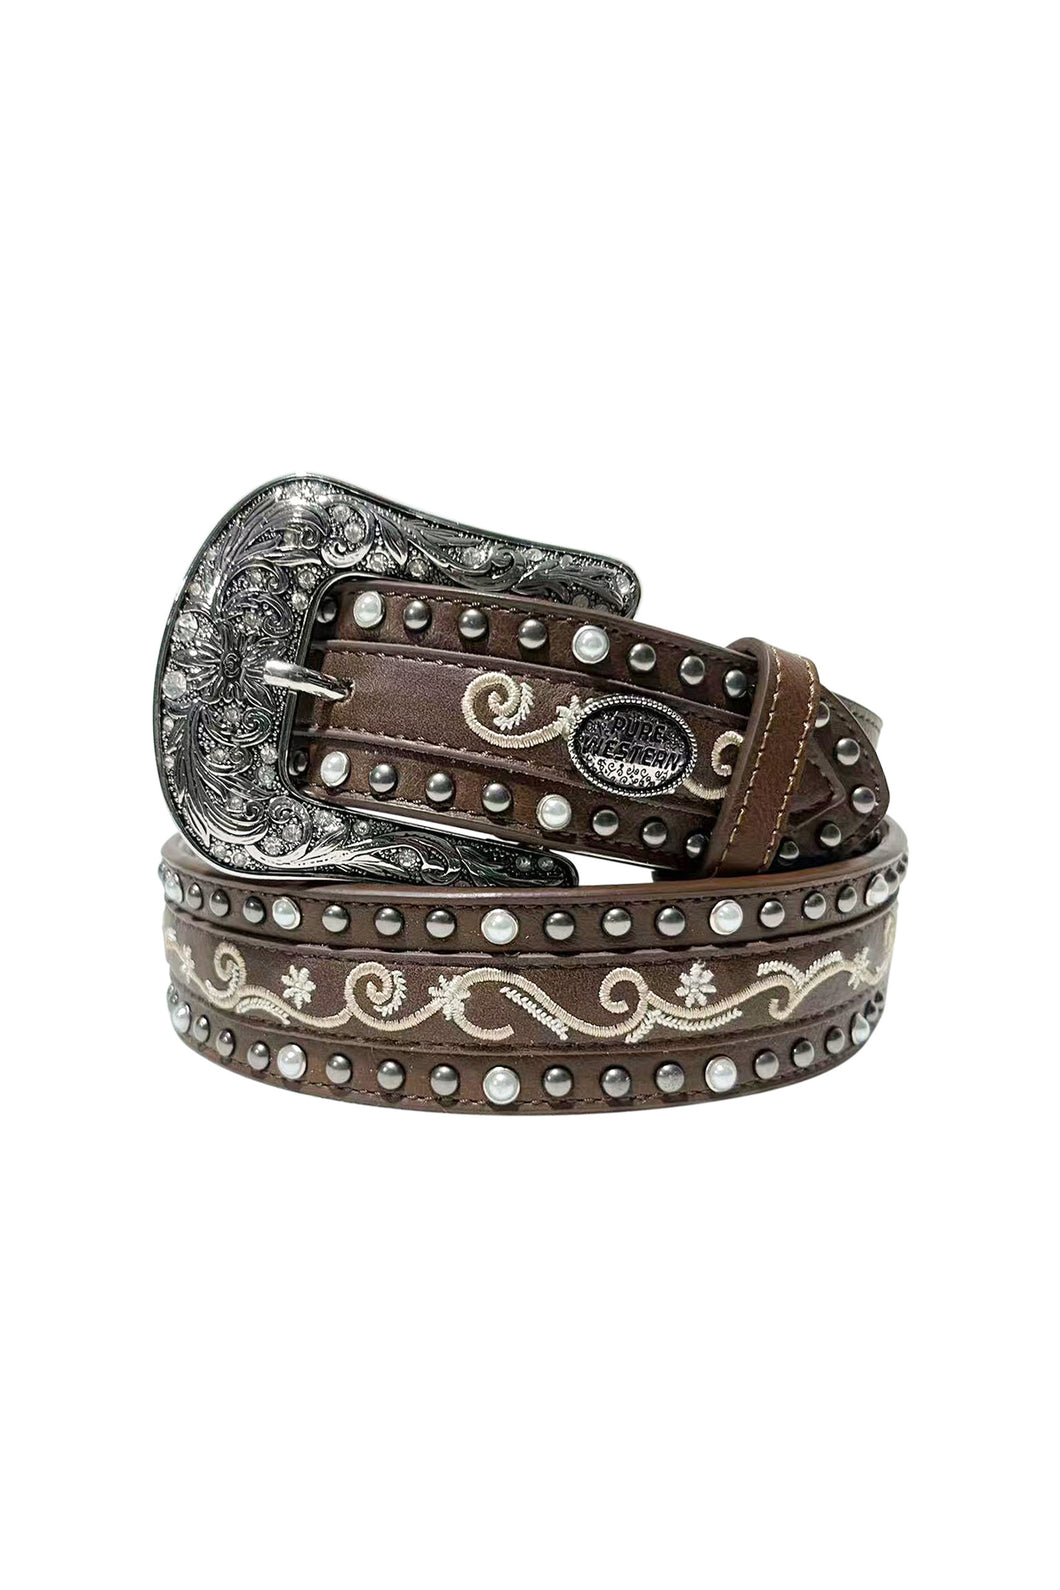 PURE WESTERN WOMENS LACEY BELT